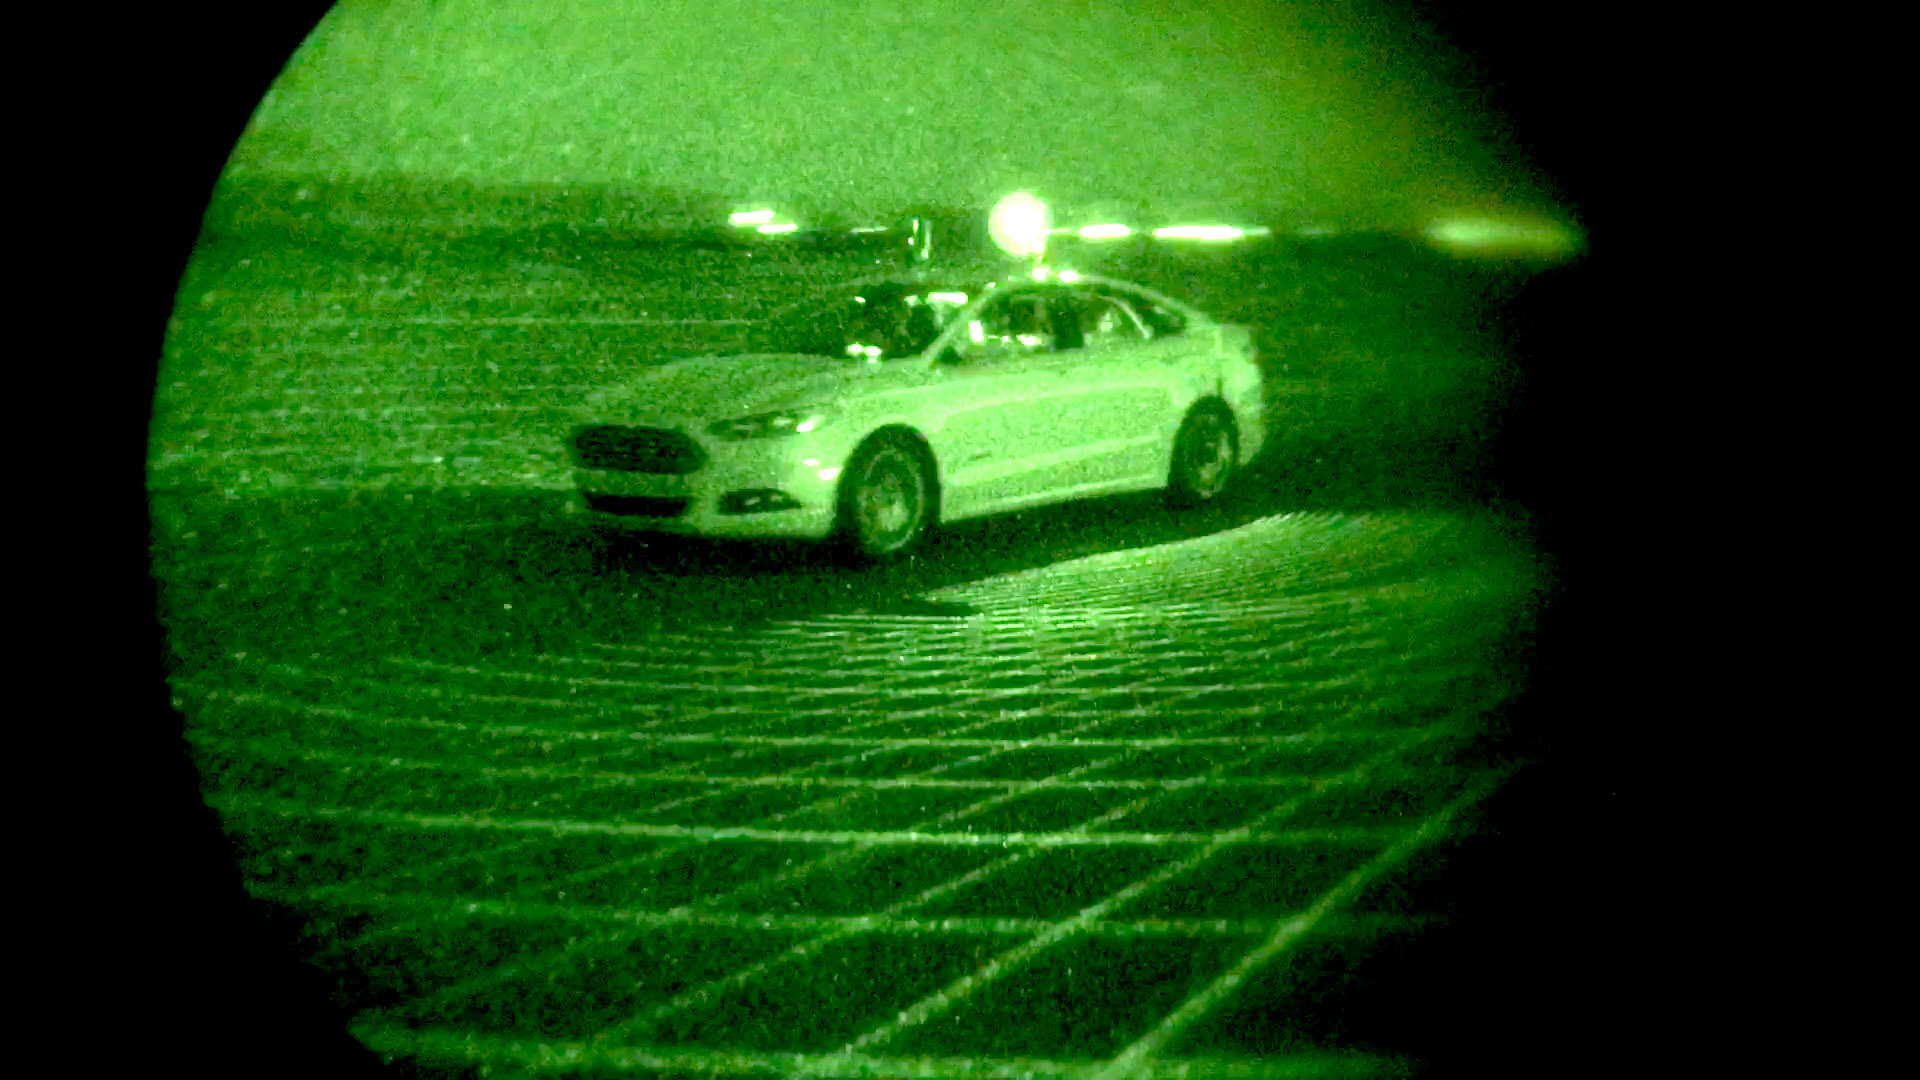 Ford tests Fusion Hybrid autonomous research vehicles at night, in complete darkness, as part of LiDAR sensor development – demonstrating the capability to perform beyond the limits of human drivers.